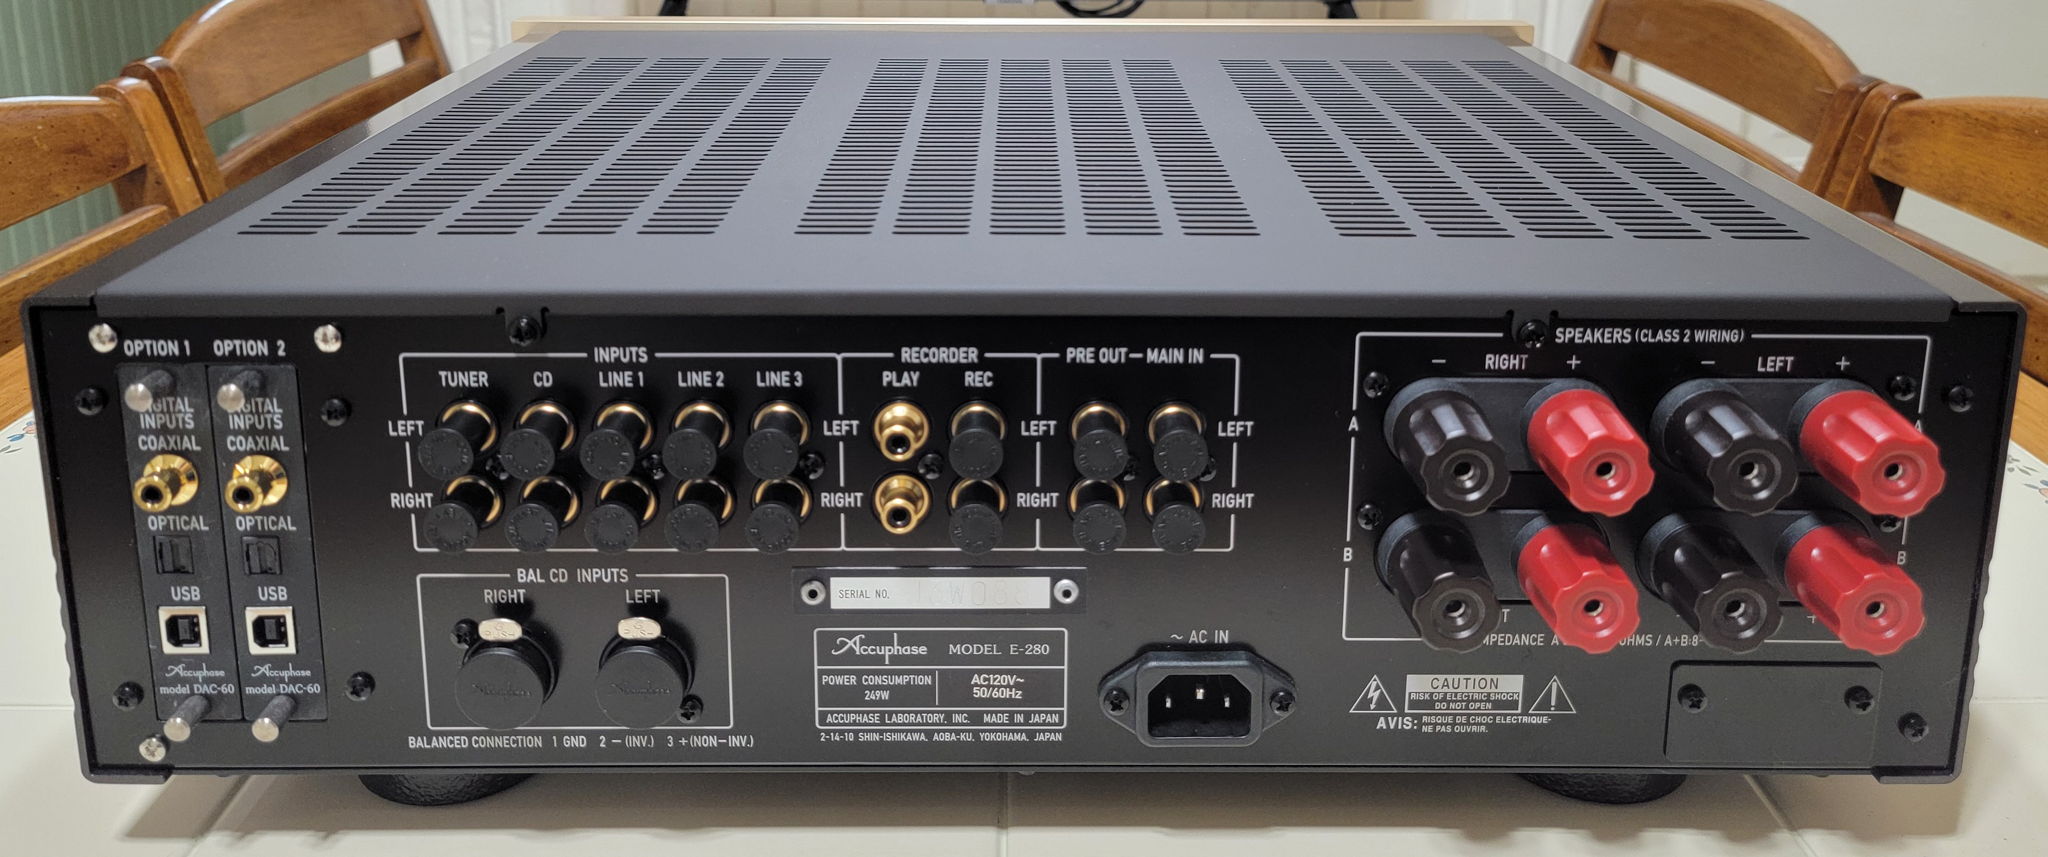 Accuphase E-280 with DAC-60 card 4